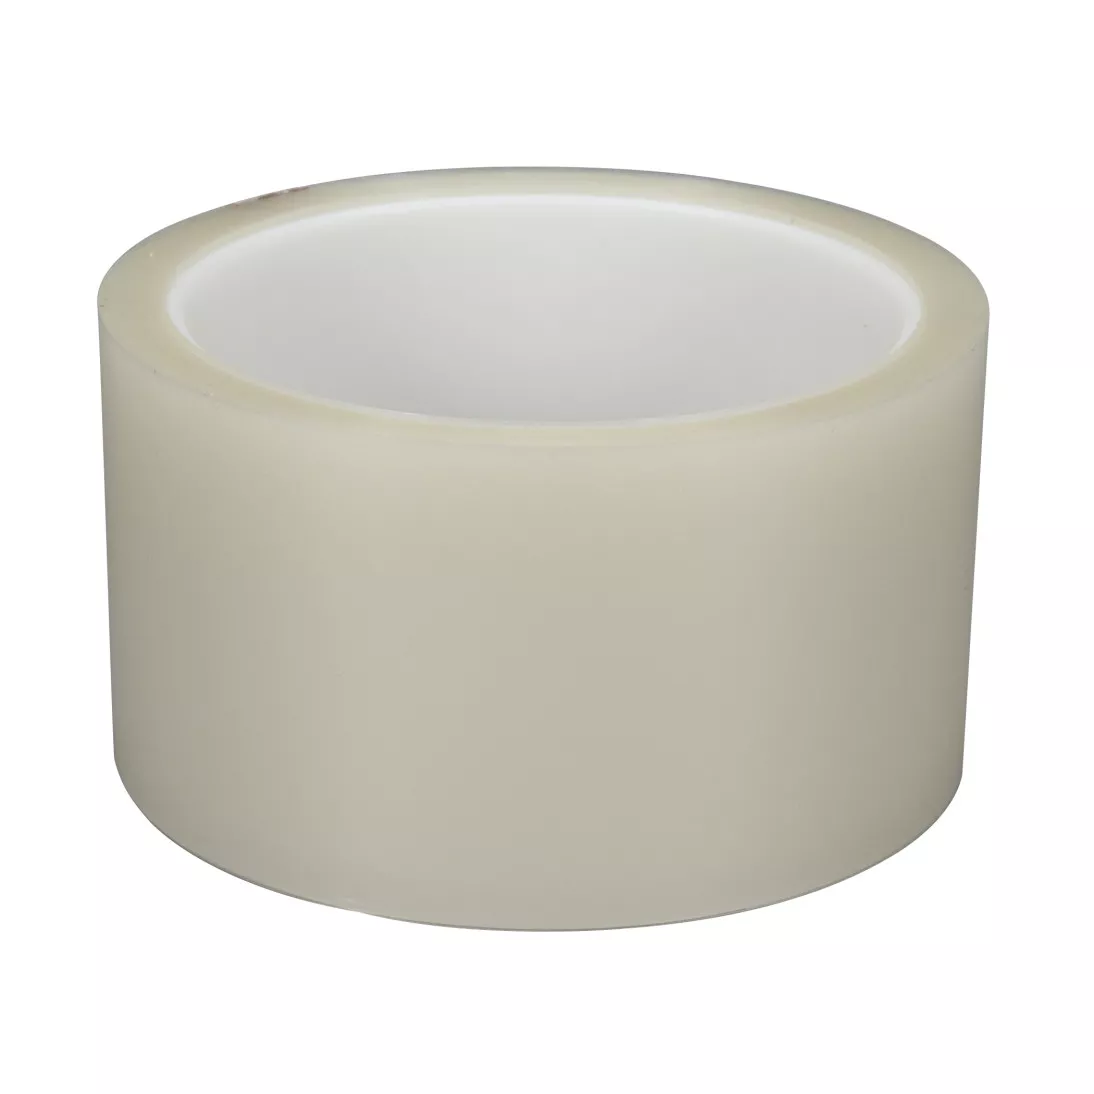 3M™ Polyester Film Tape 853, Transparent, 8 in x 72 yd, 2.2 mil, 4
Roll/Case